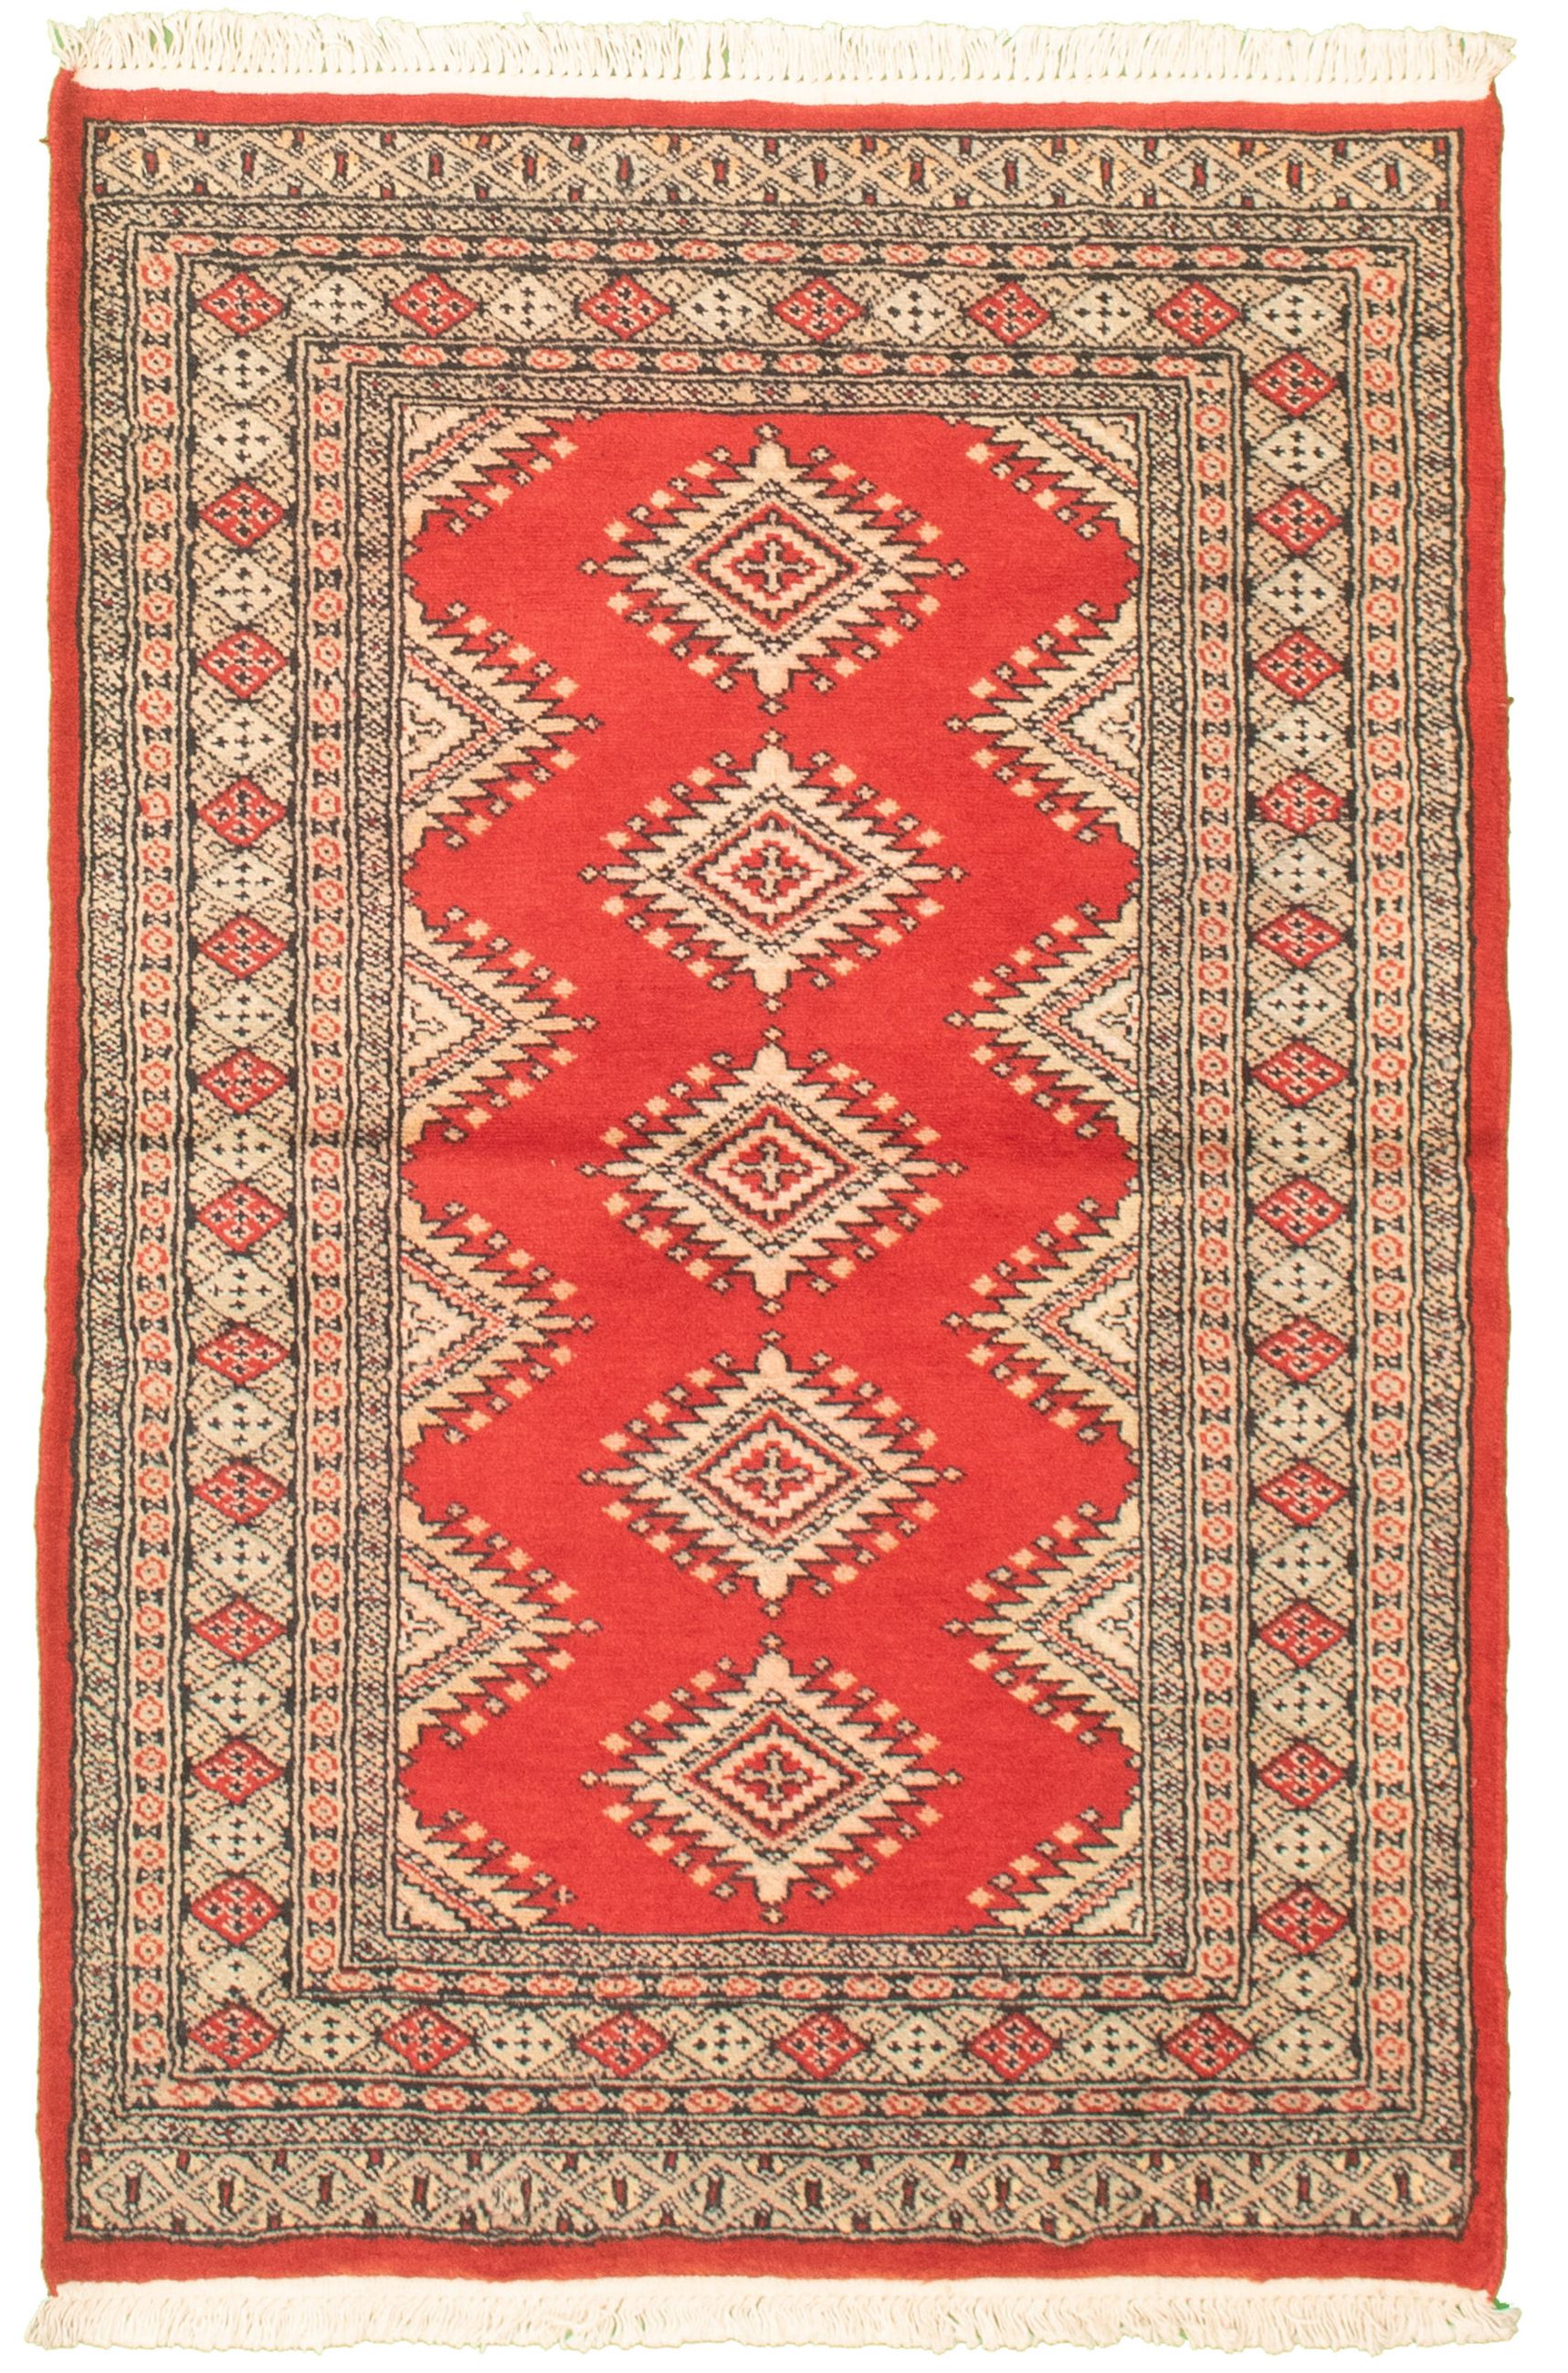 Hand-knotted Finest Peshawar Bokhara Red Wool Rug 3'3" x 5'1"  Size: 3'3" x 5'1"  